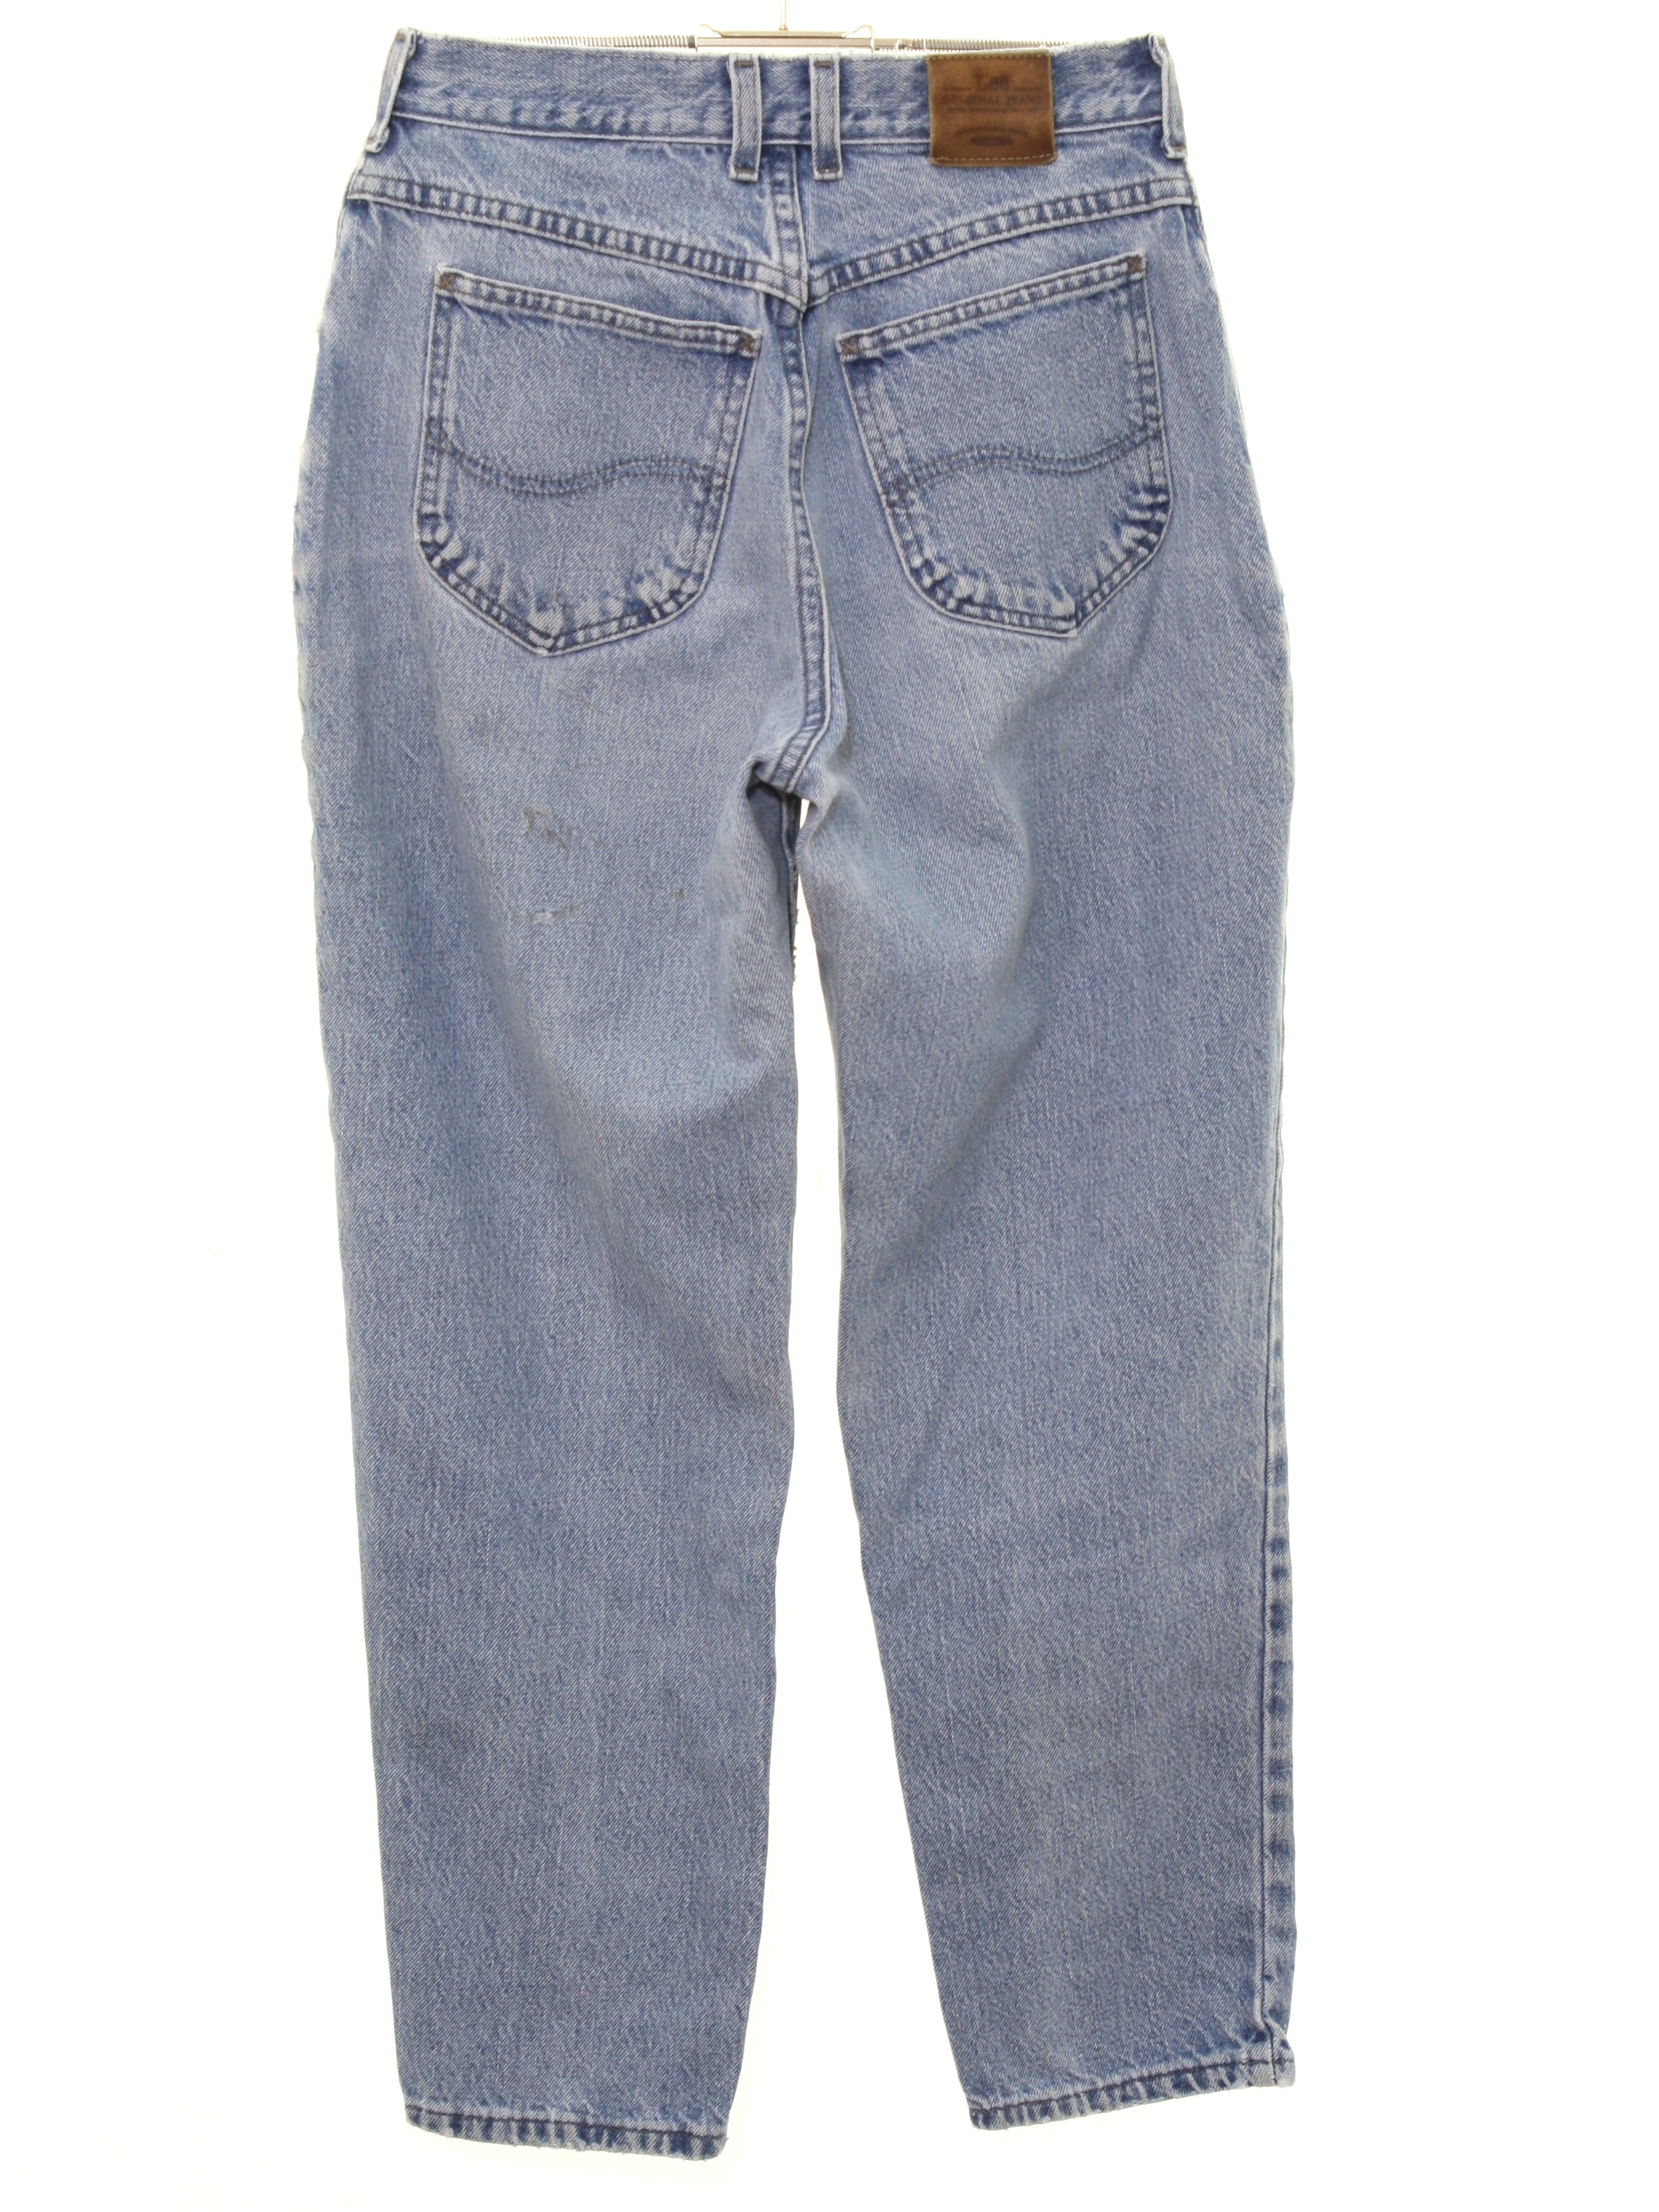 Vintage 1990's Pants: 90s -Lee Original Jeans- Womens faded and worn ...